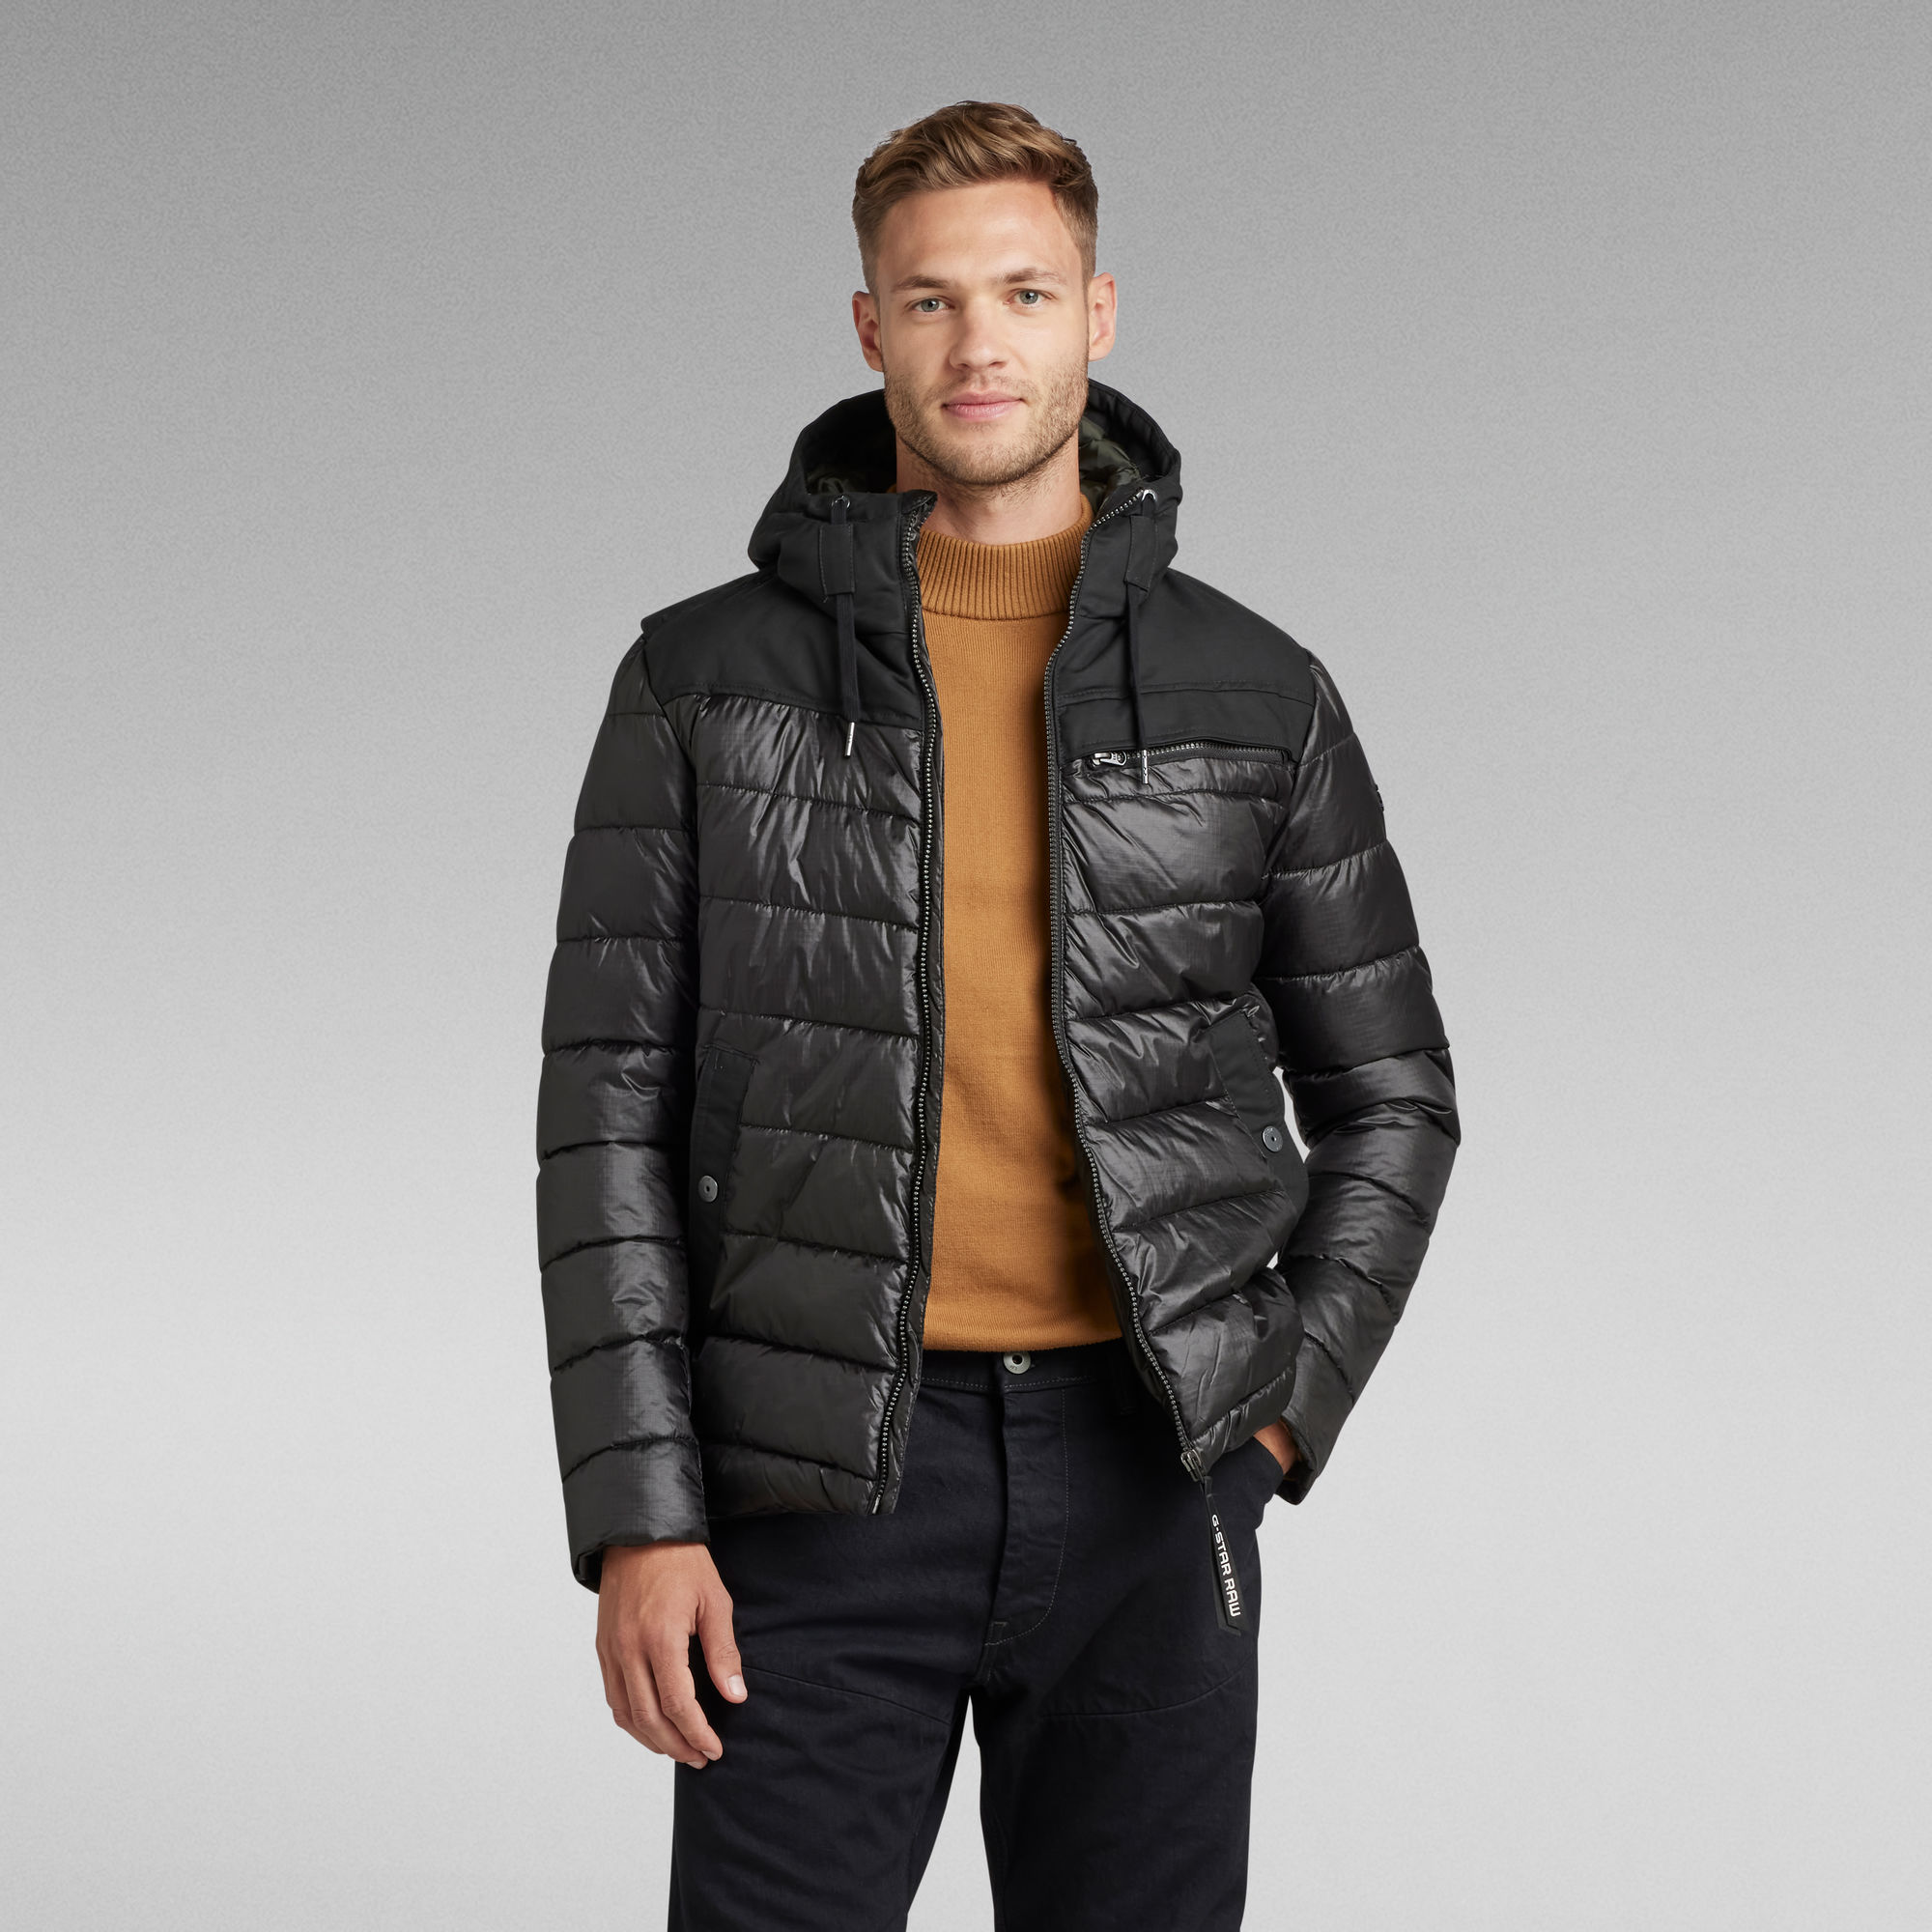 Attacc Quilted Hooded Jacket | Black | G-Star RAW®